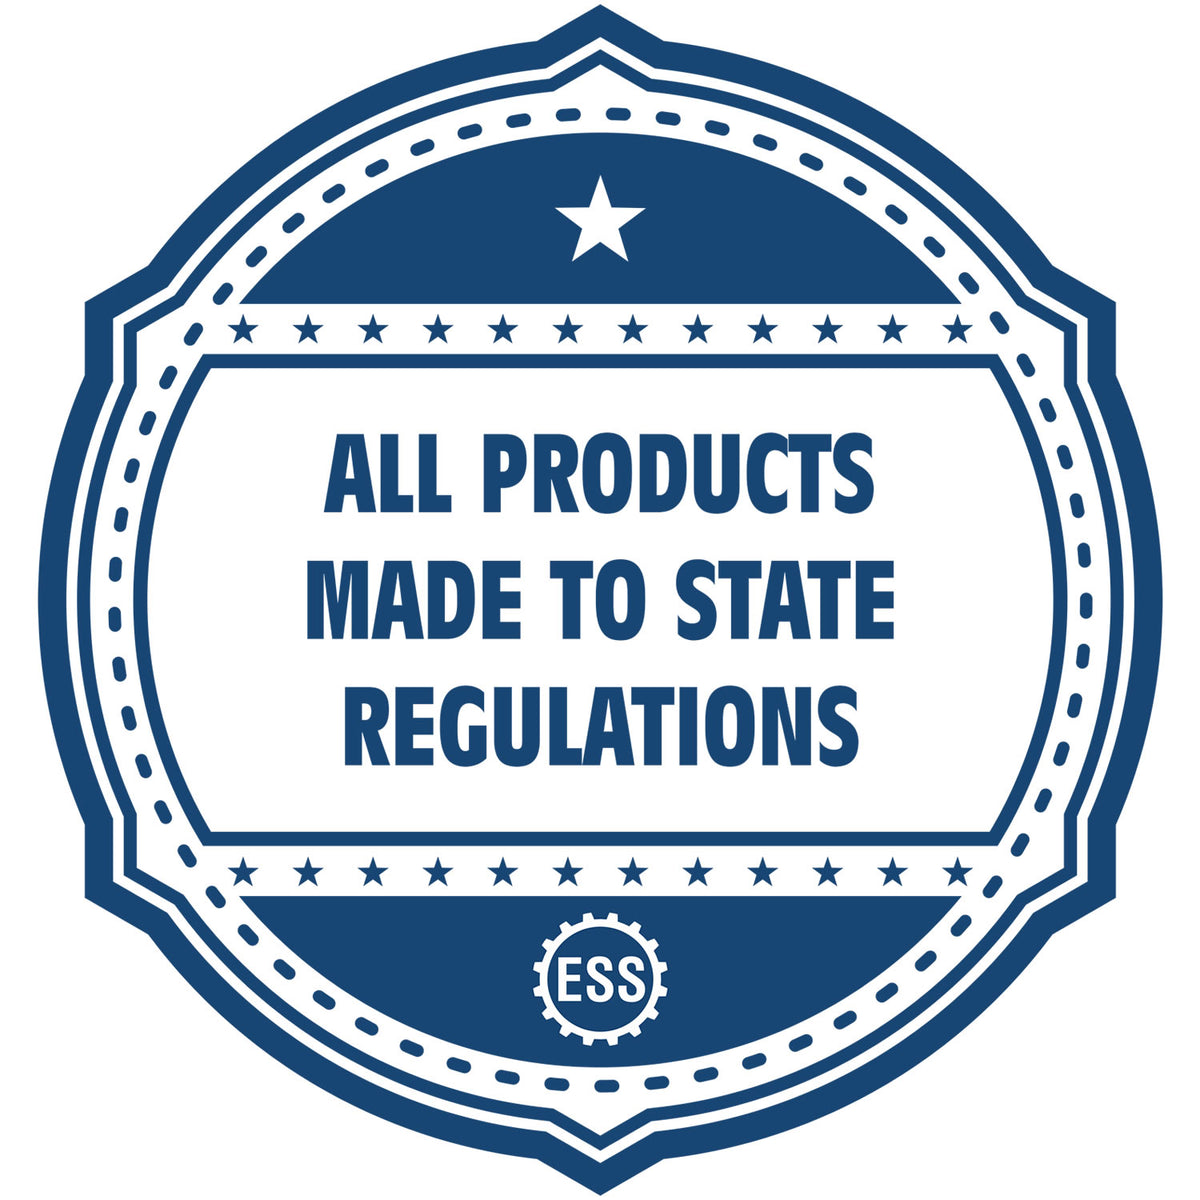 An icon or badge element for the Heavy Duty Cast Iron Massachusetts Engineer Seal Embosser showing that this product is made in compliance with state regulations.